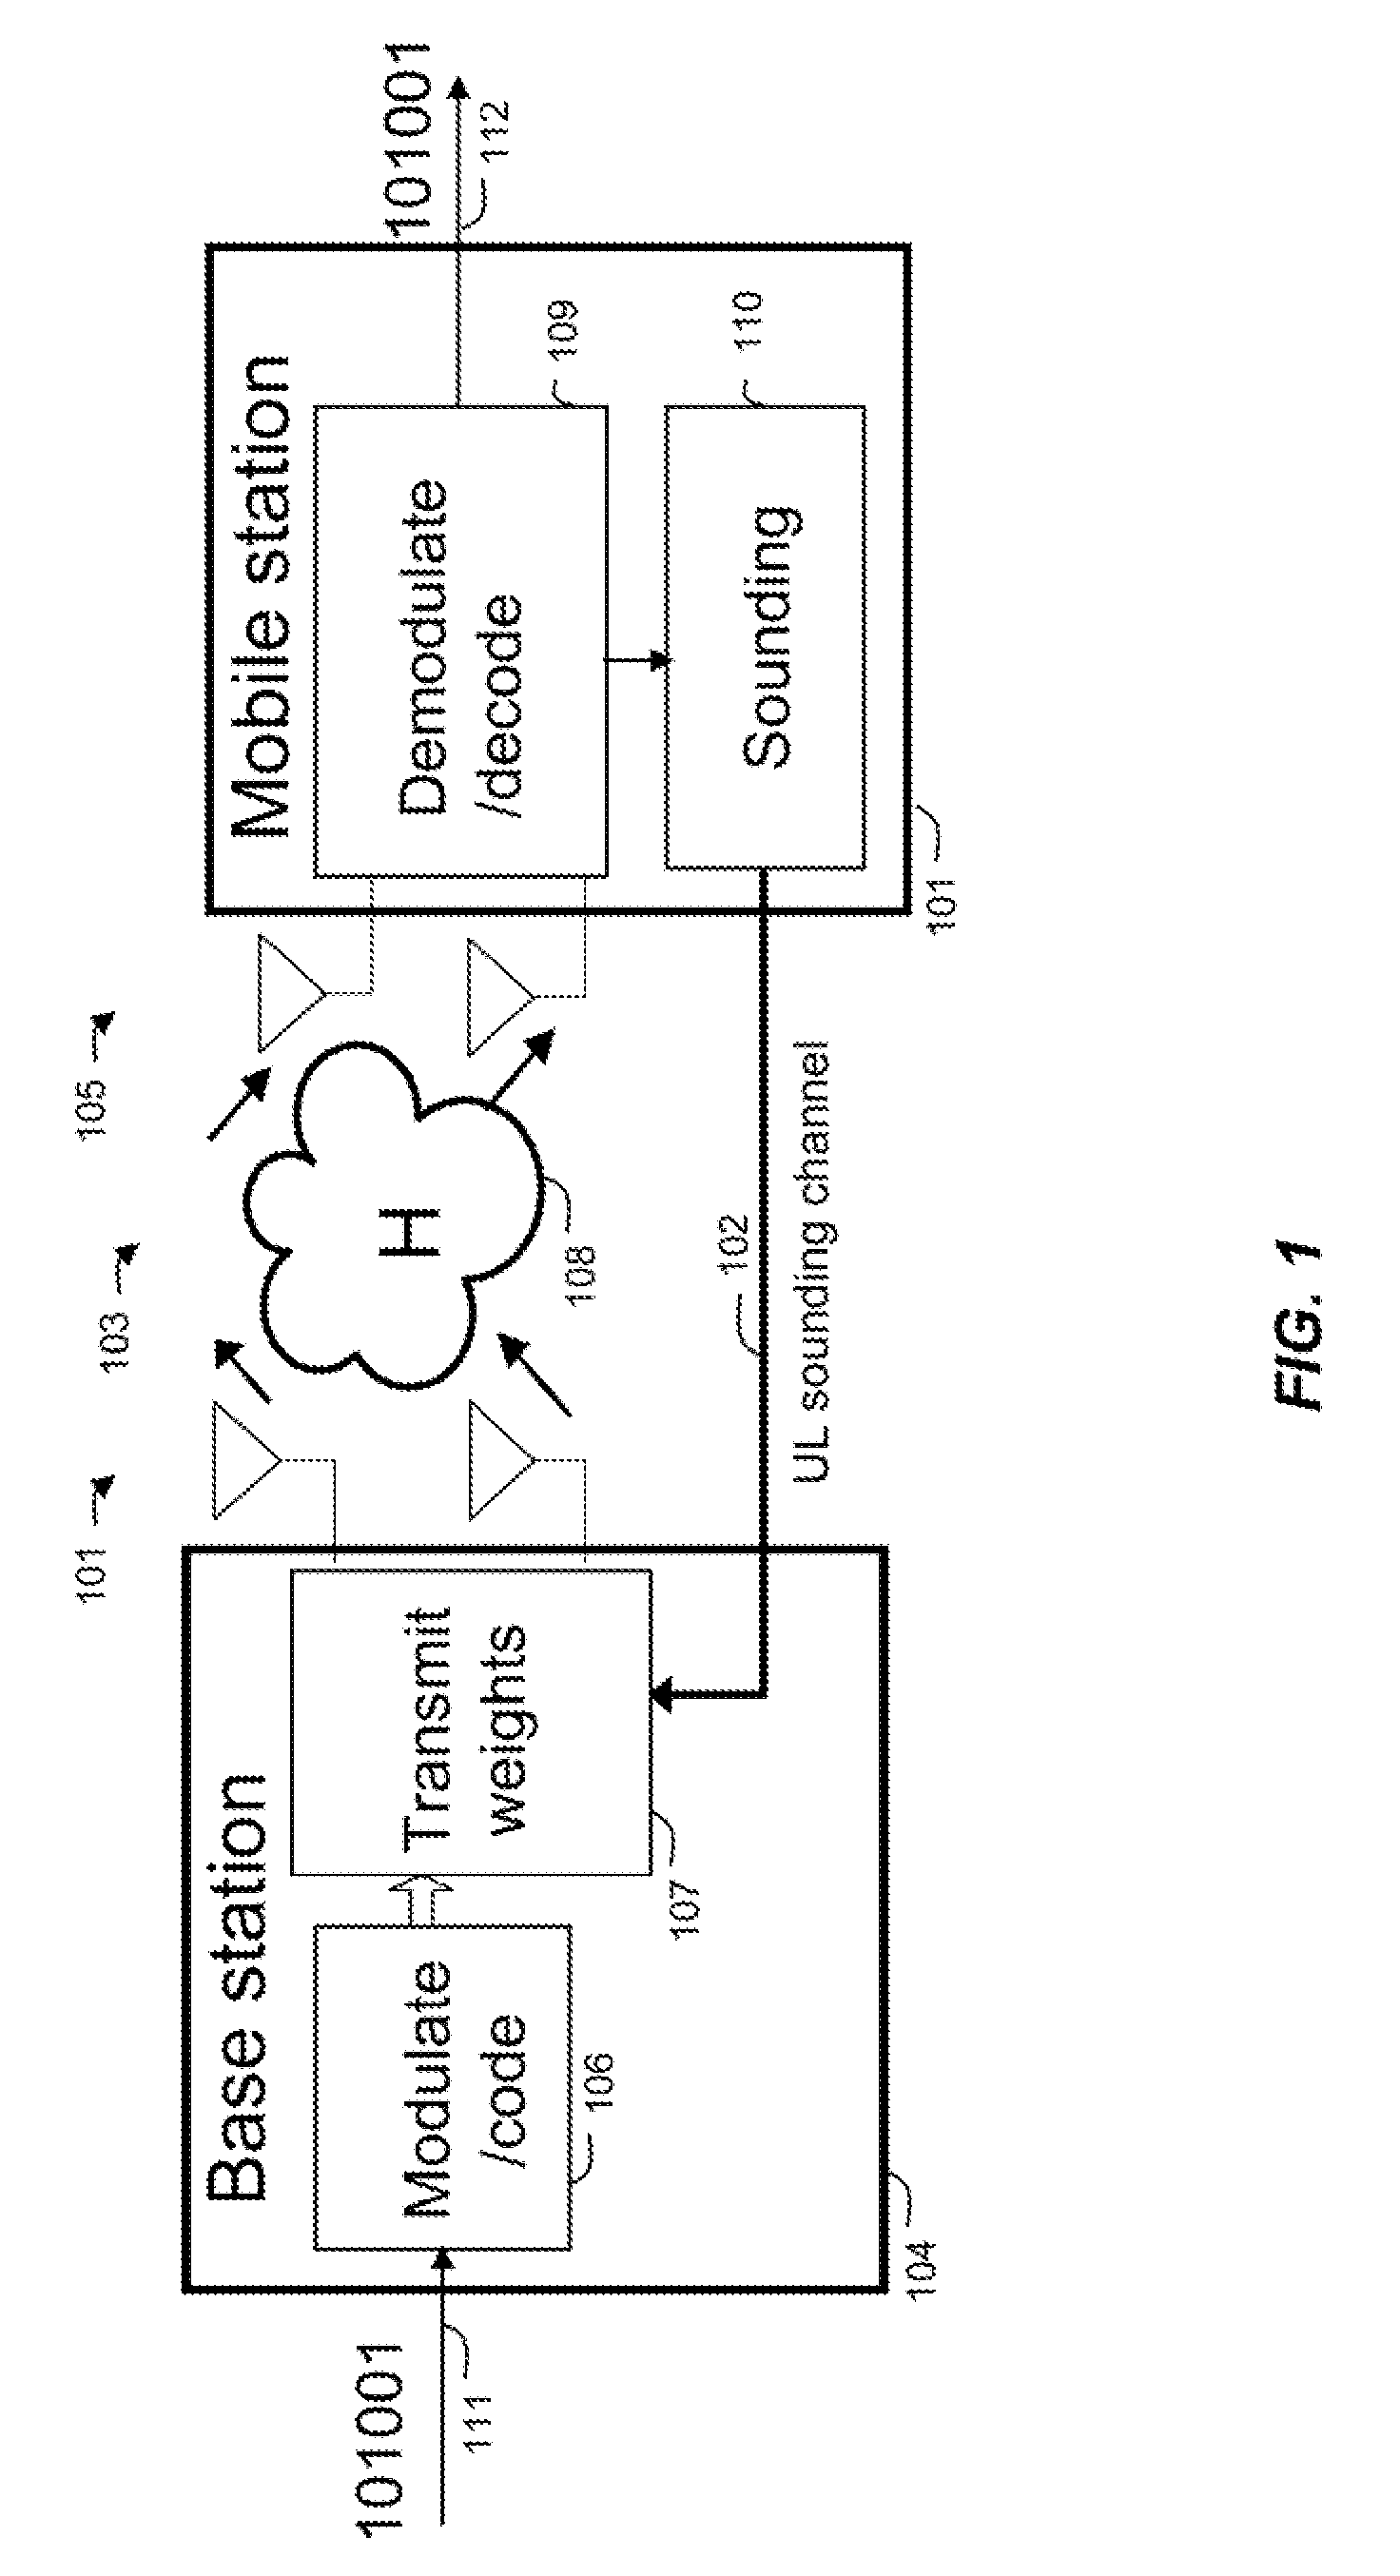 Sounding channel based feedback in a wireless communication system